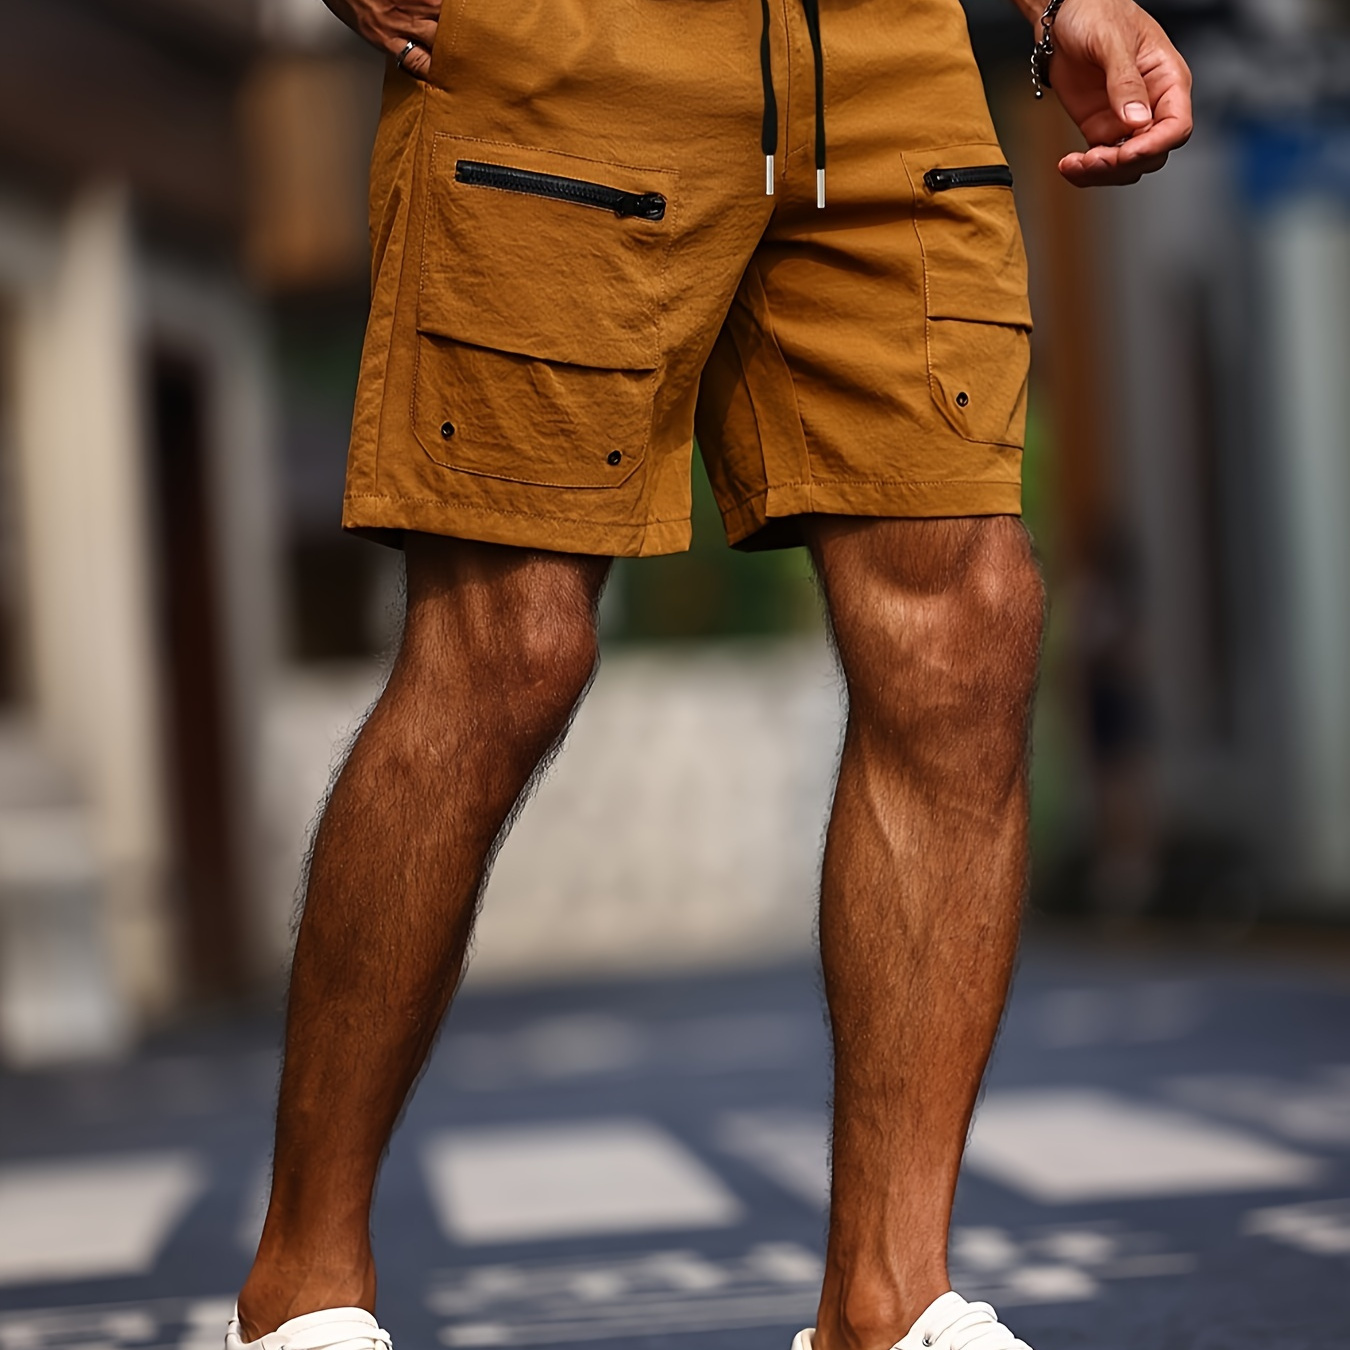 

Solid Cargo Men's Casual Shorts With Multiple Zipper Pockets, Summer Outdoor Work, Bermuda Shorts